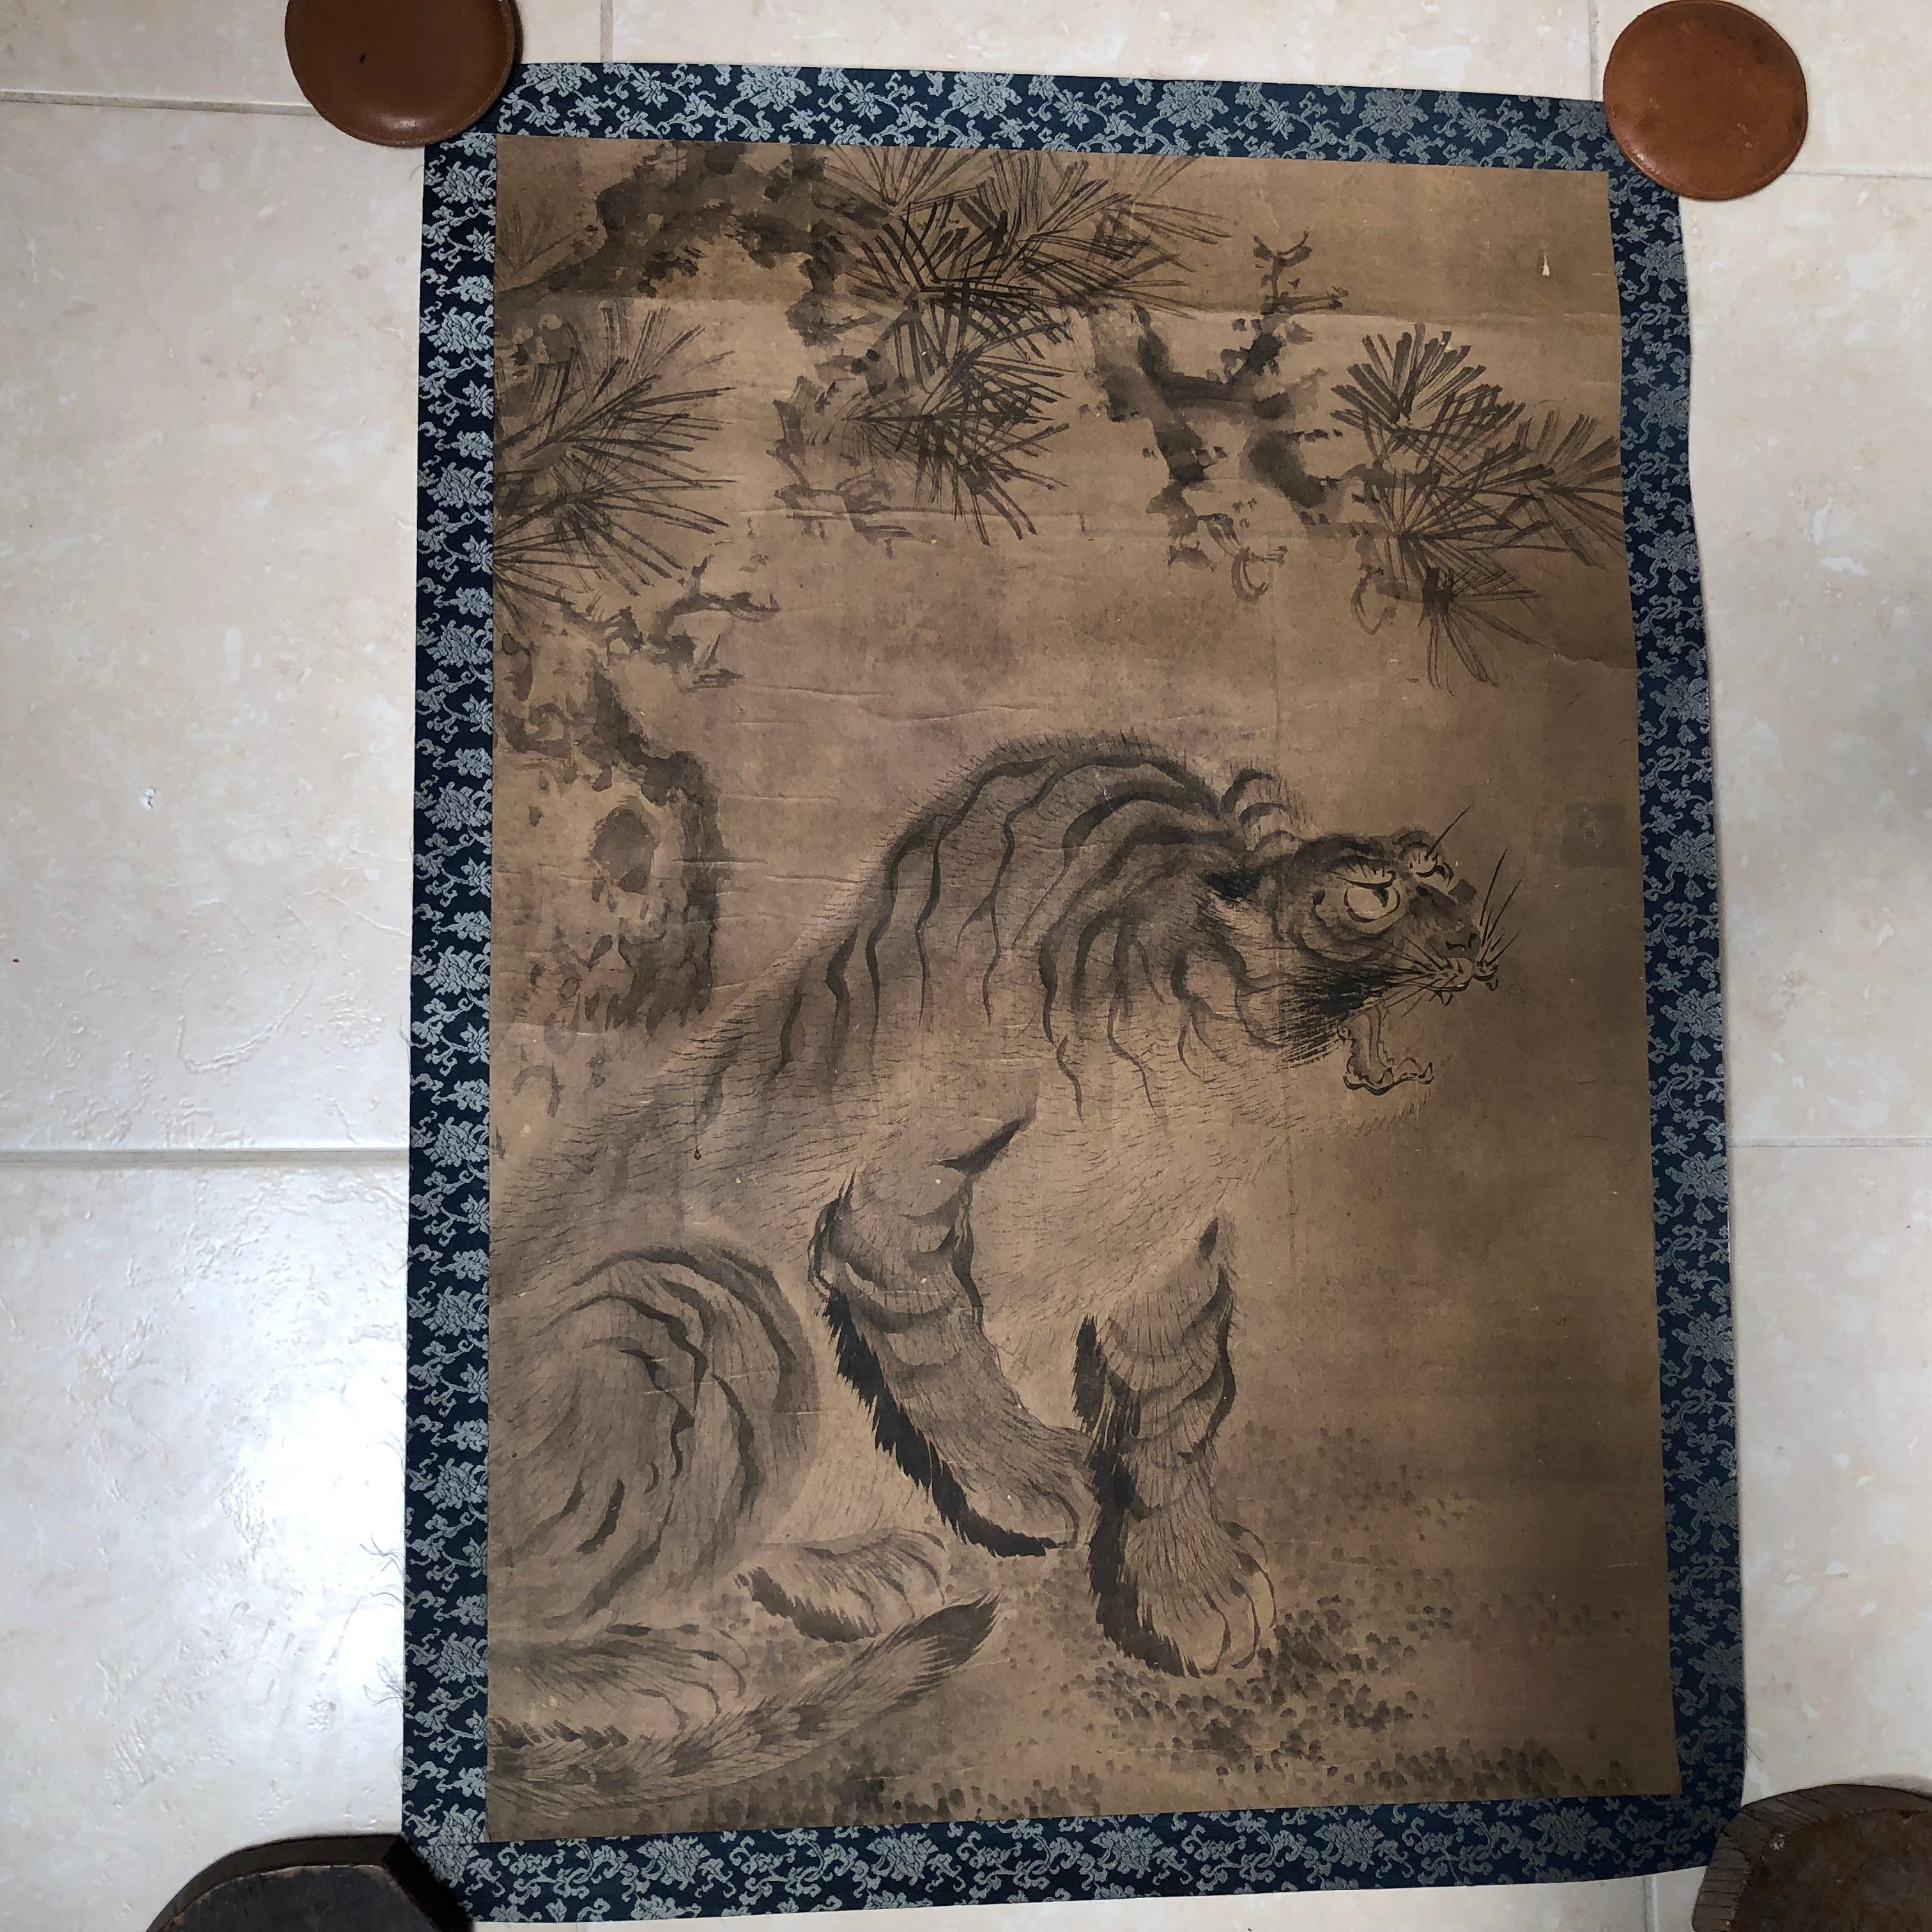 A beautiful and compelling Japanese antique hand-painted silk painting of a stealthy tiger- worthy of your favorite room.
Hand painting on silk in simple soft pleasing colors - immediately frameable. 

Remnant old signature stamp top